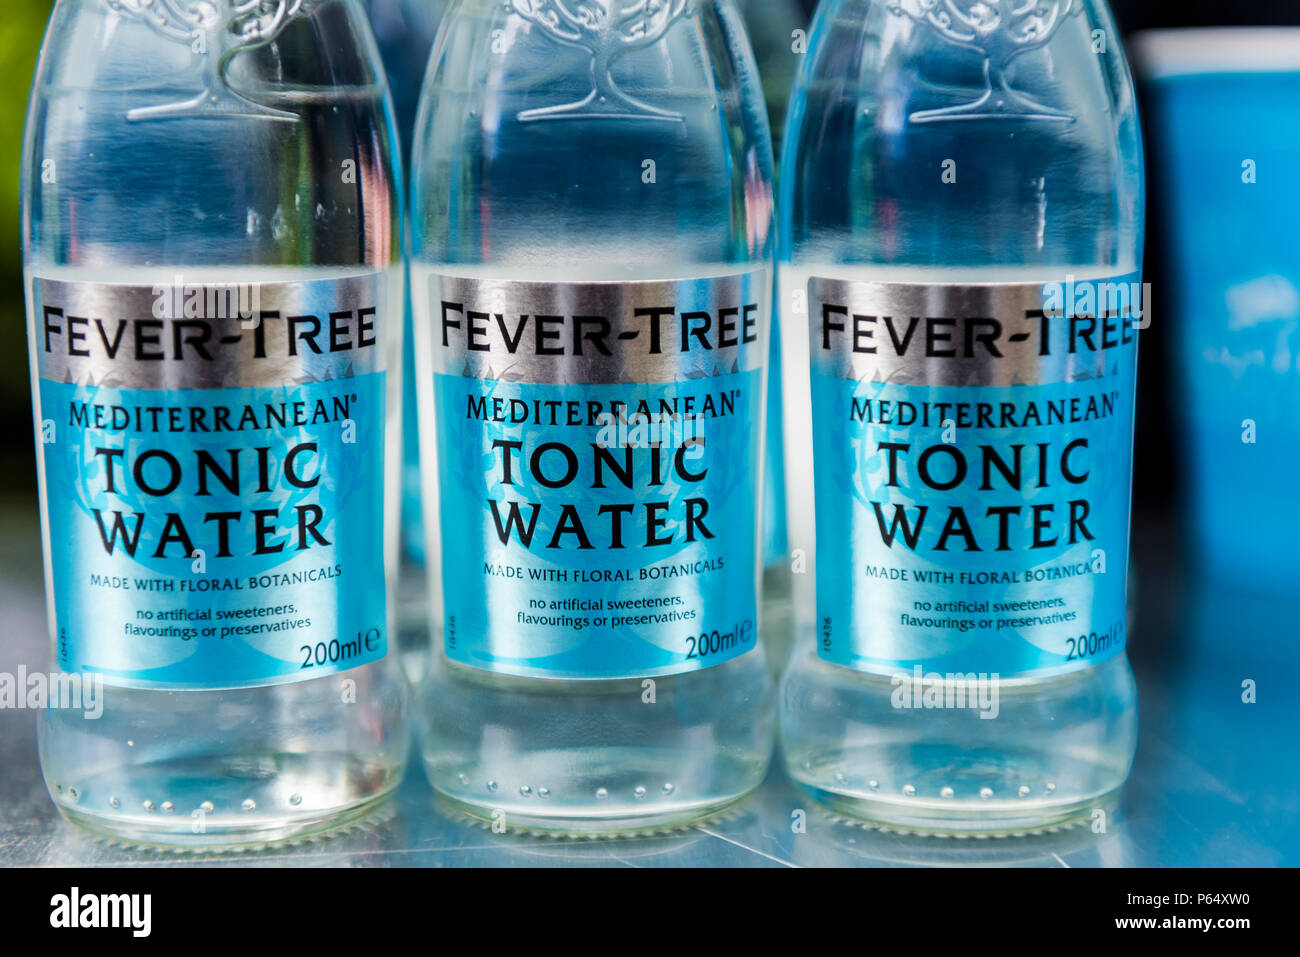 Flaschen Fever-Tree Tonic Water. Stockfoto